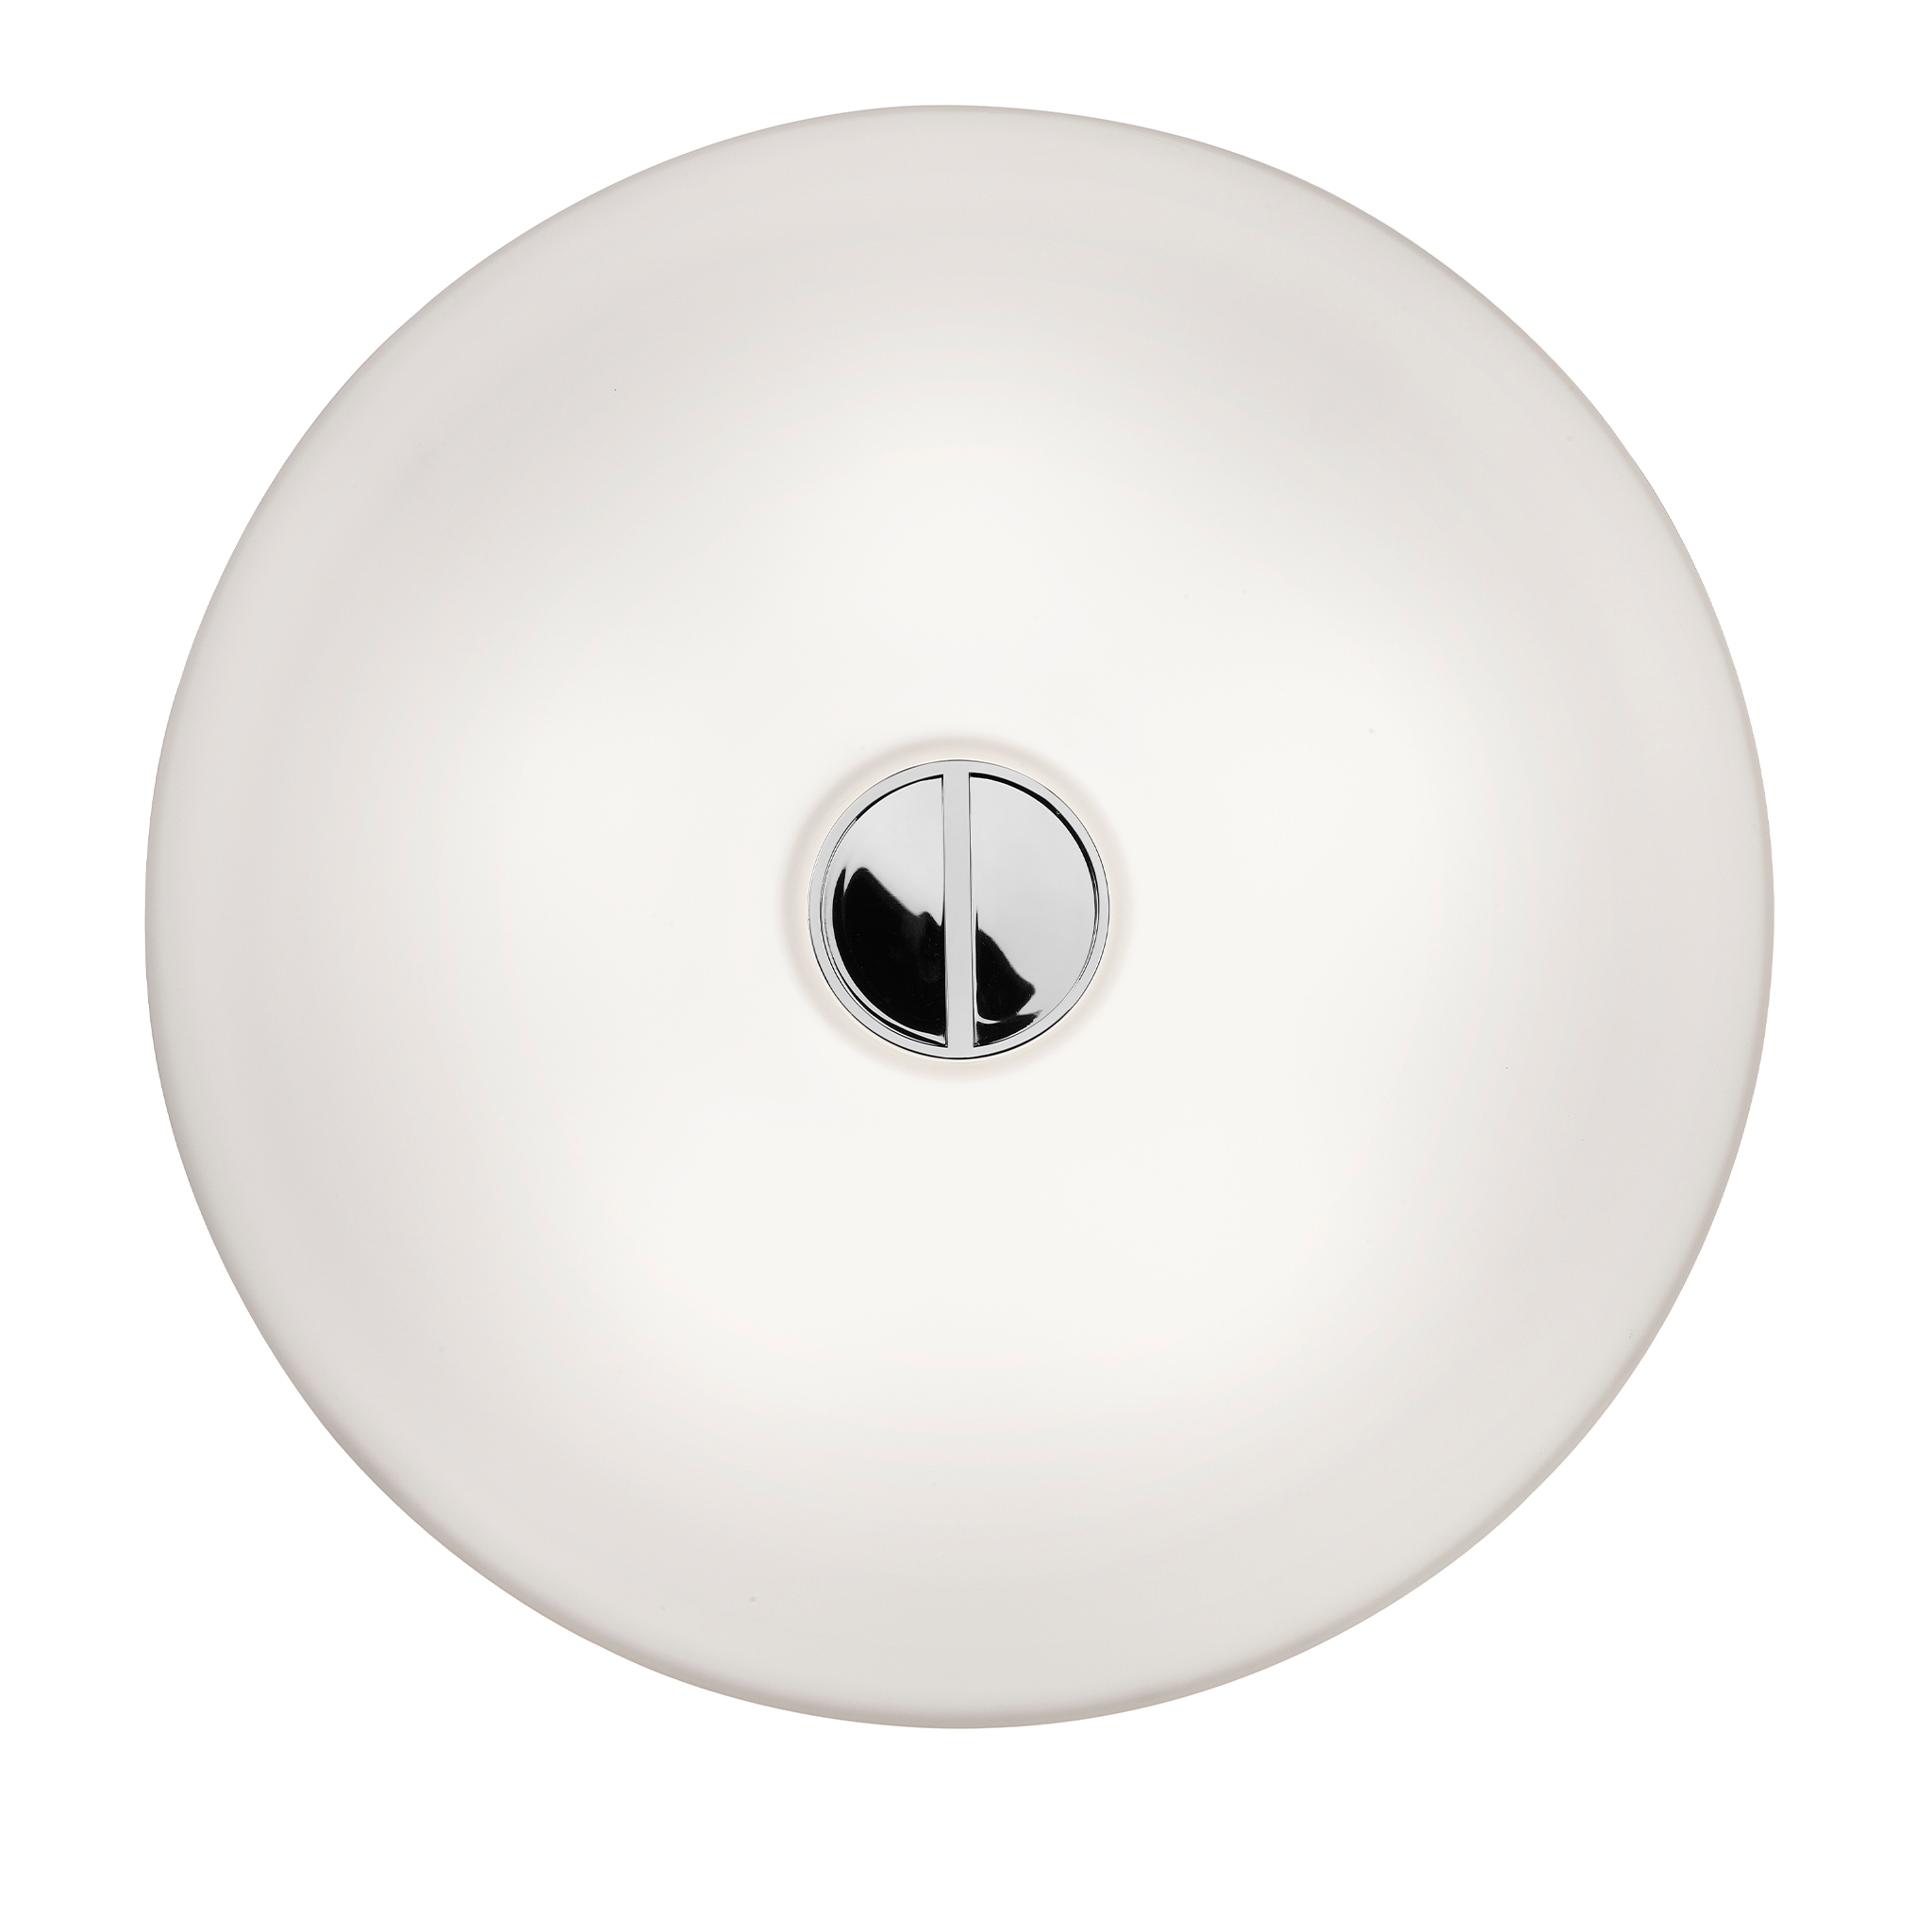 Button HL by Piero Lissoni for Flos